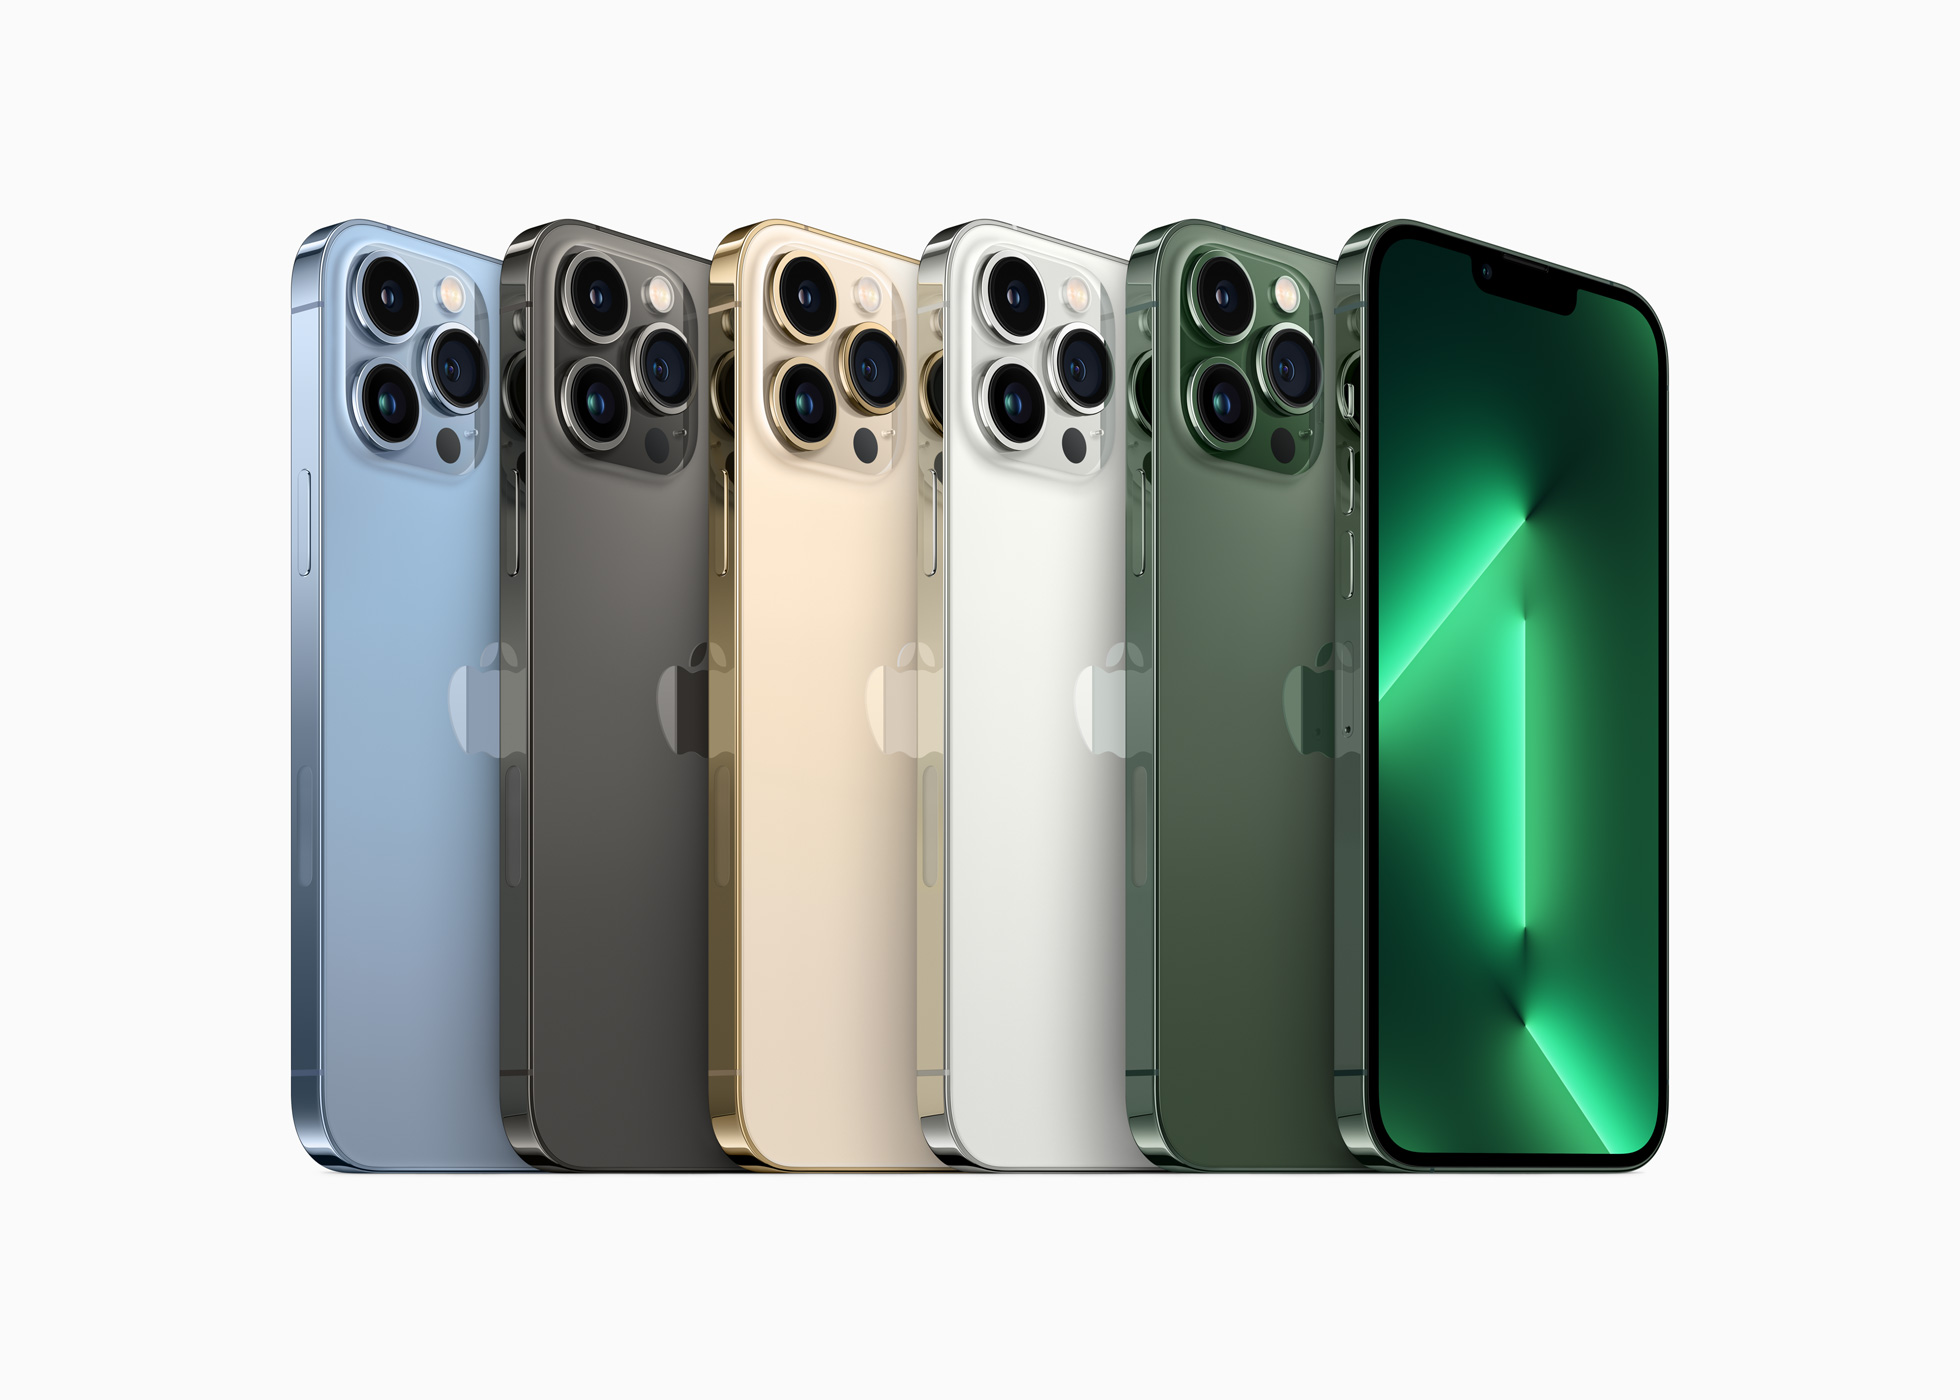 Apple Keeping iPhone Production Target Unchanged at 220 Million Units for 2022